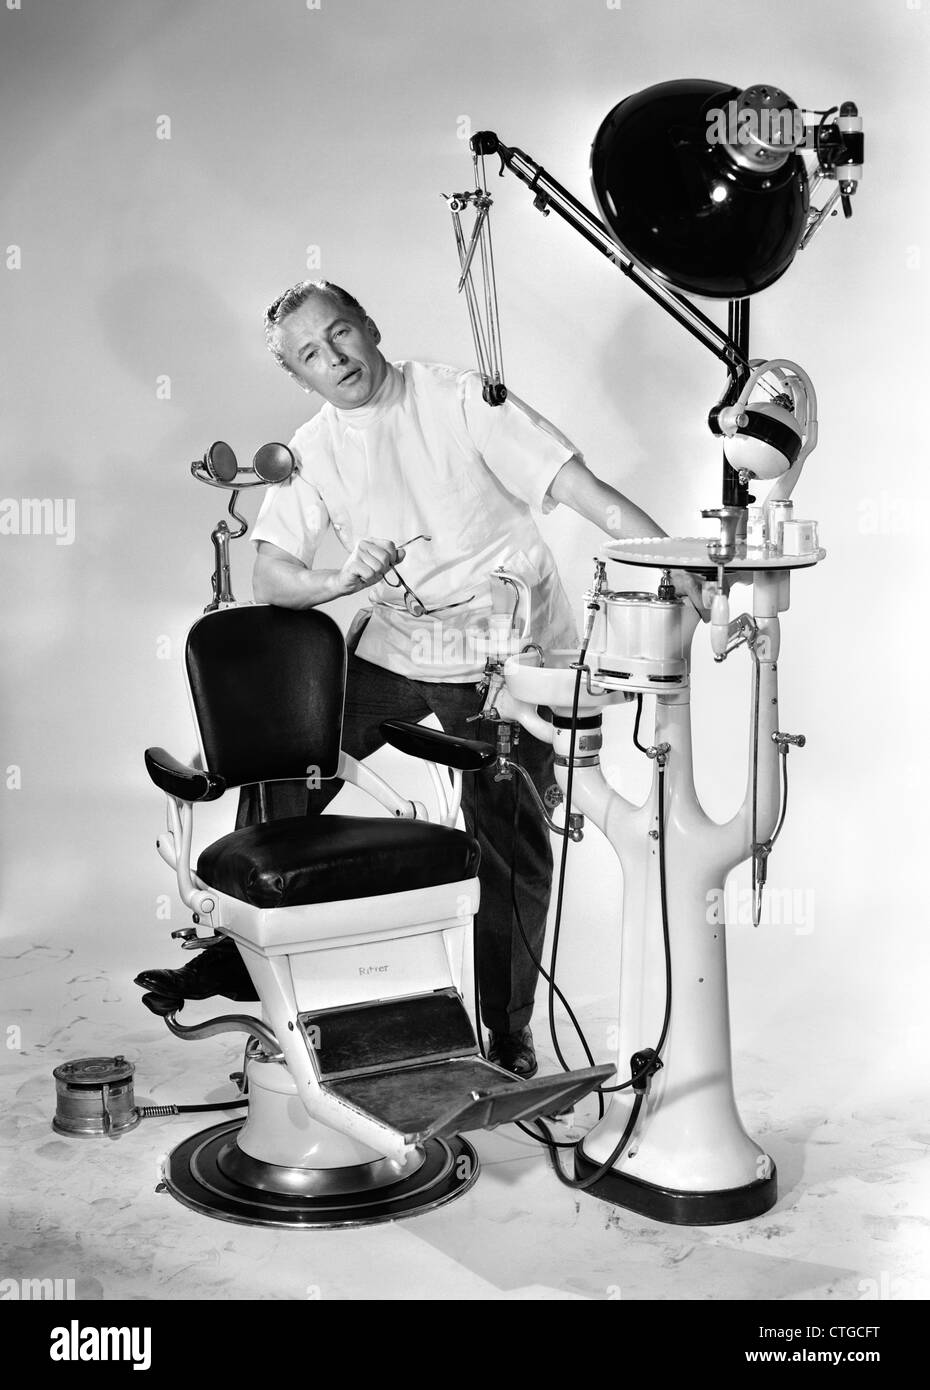 1950s MAN DENTIST HOLDING GLASSES SPEAKING FOOT PROPPED UP ON DENTAL CHAIR AND EQUIPMENT LOOKING AT CAMERA Stock Photo